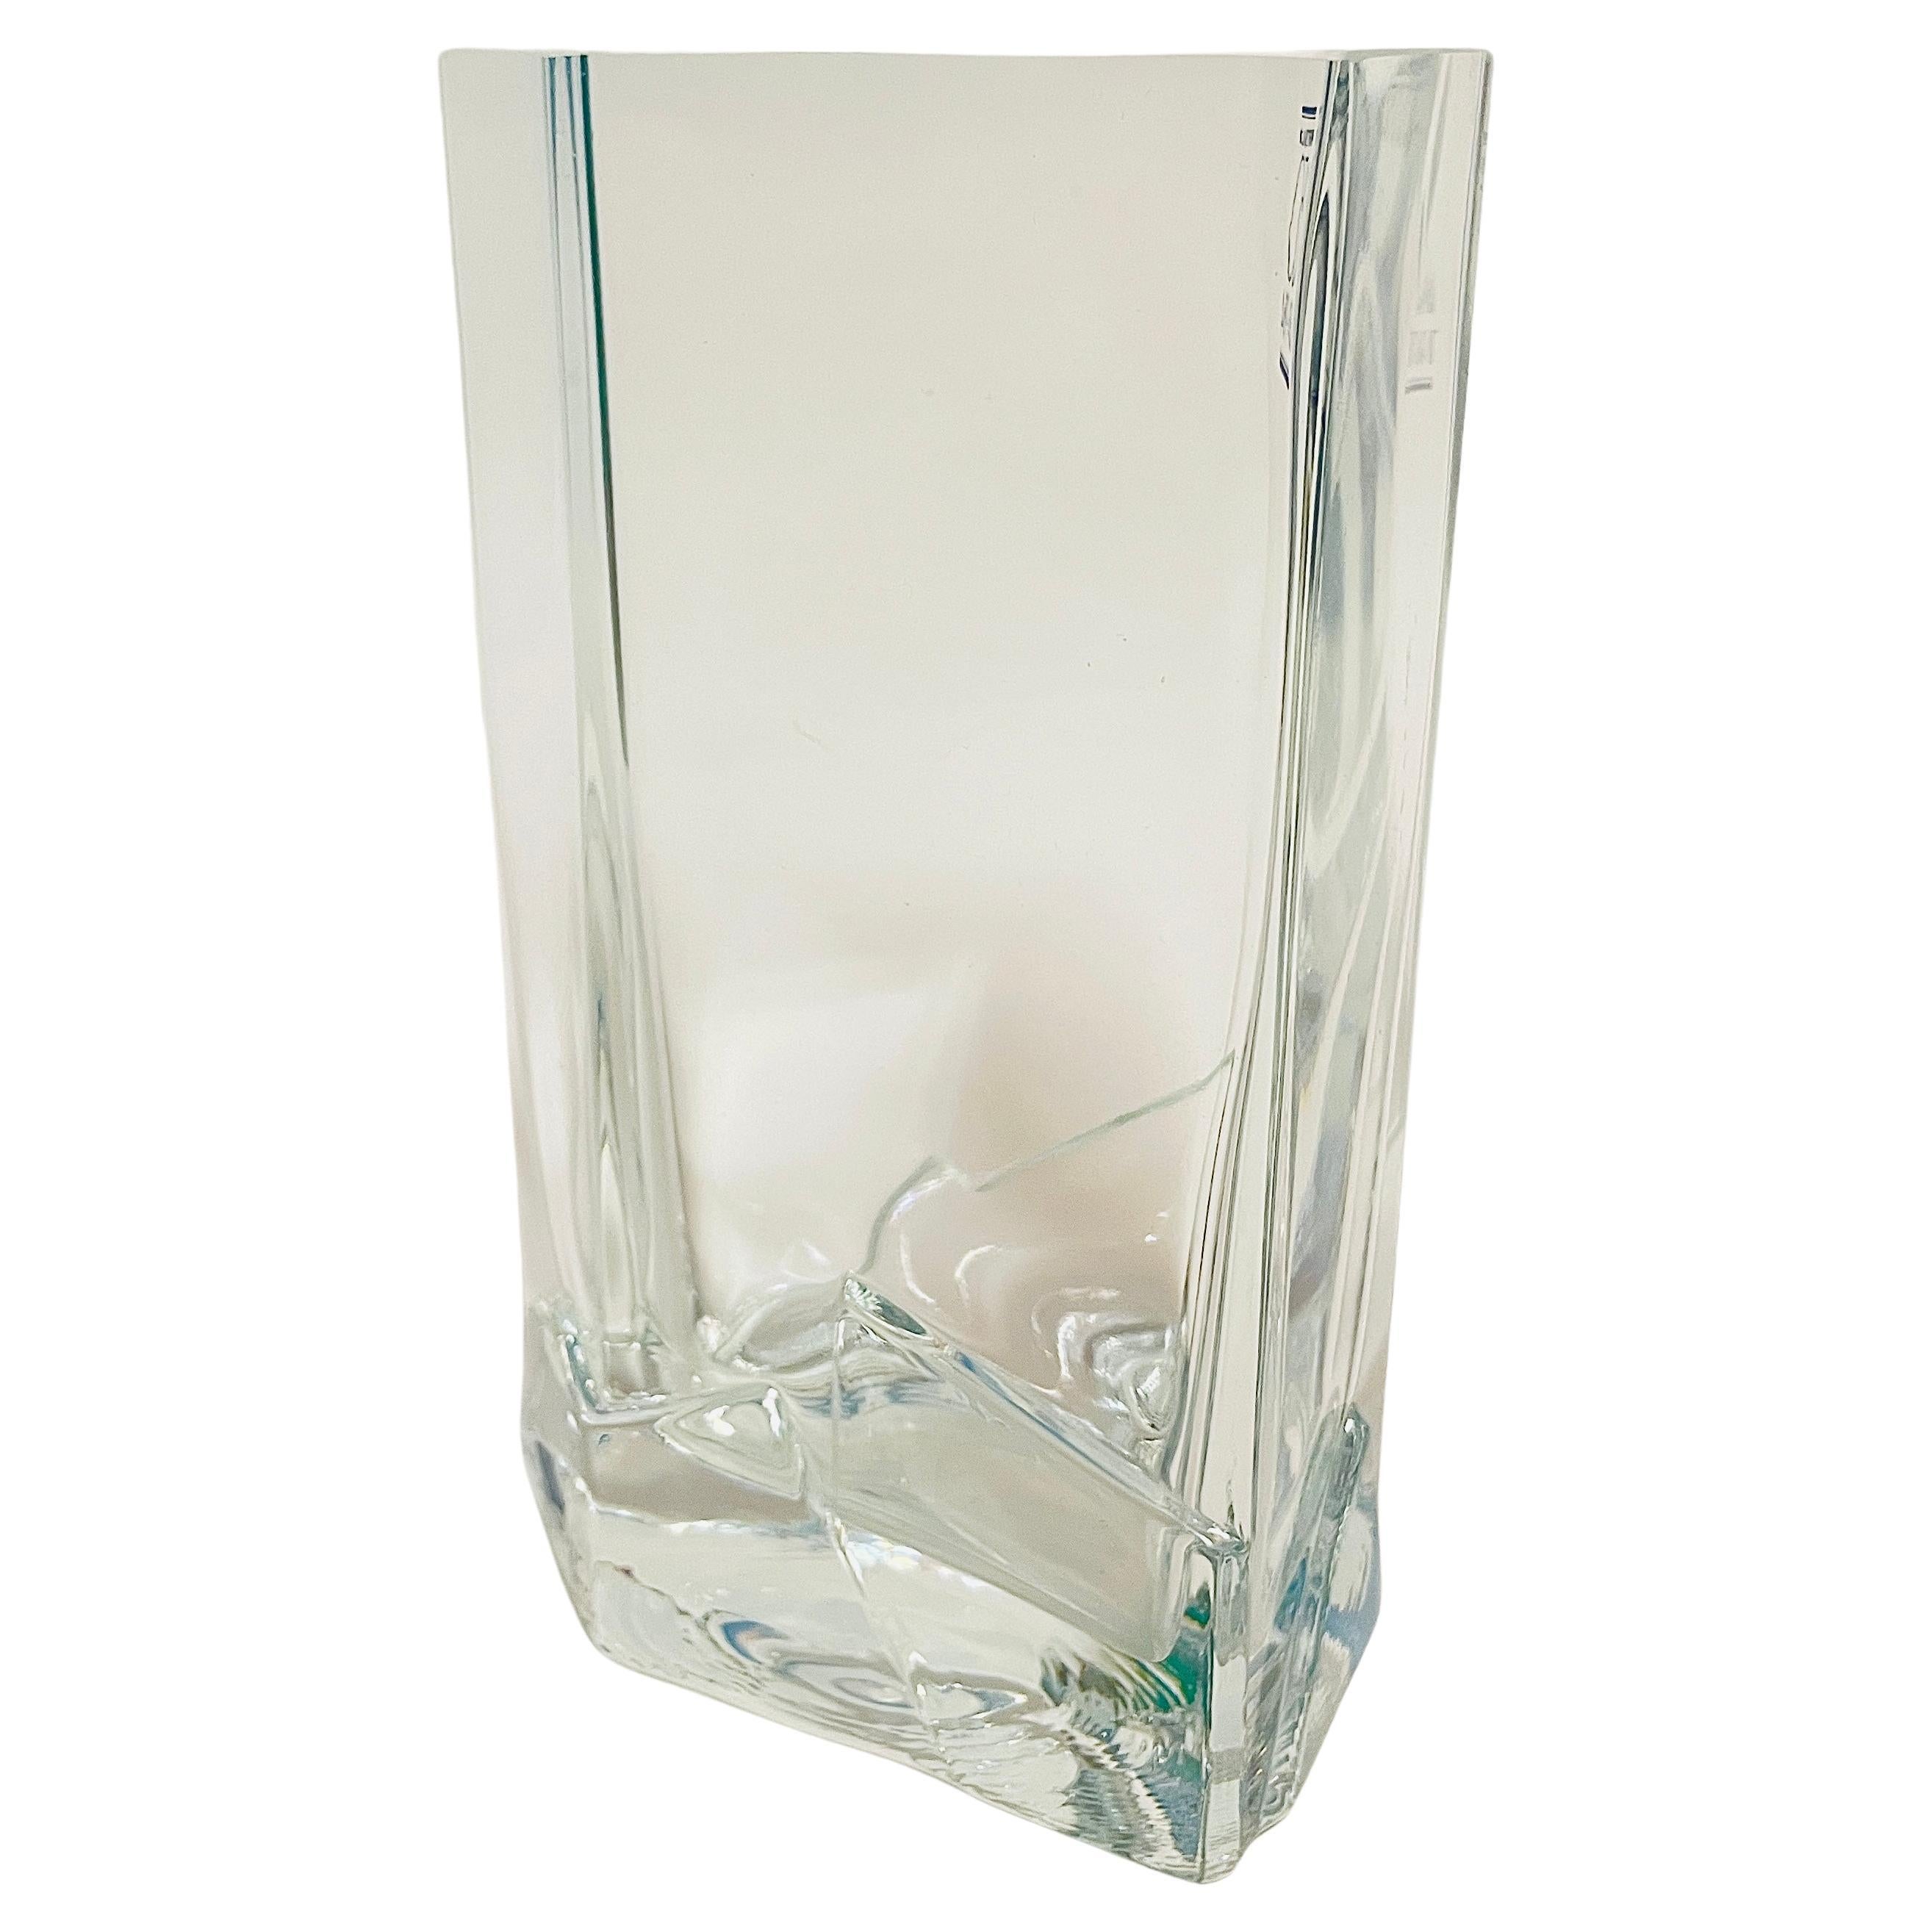 Clear Glass Vase made by Nuutajärvi glassworks Finland in 1984.